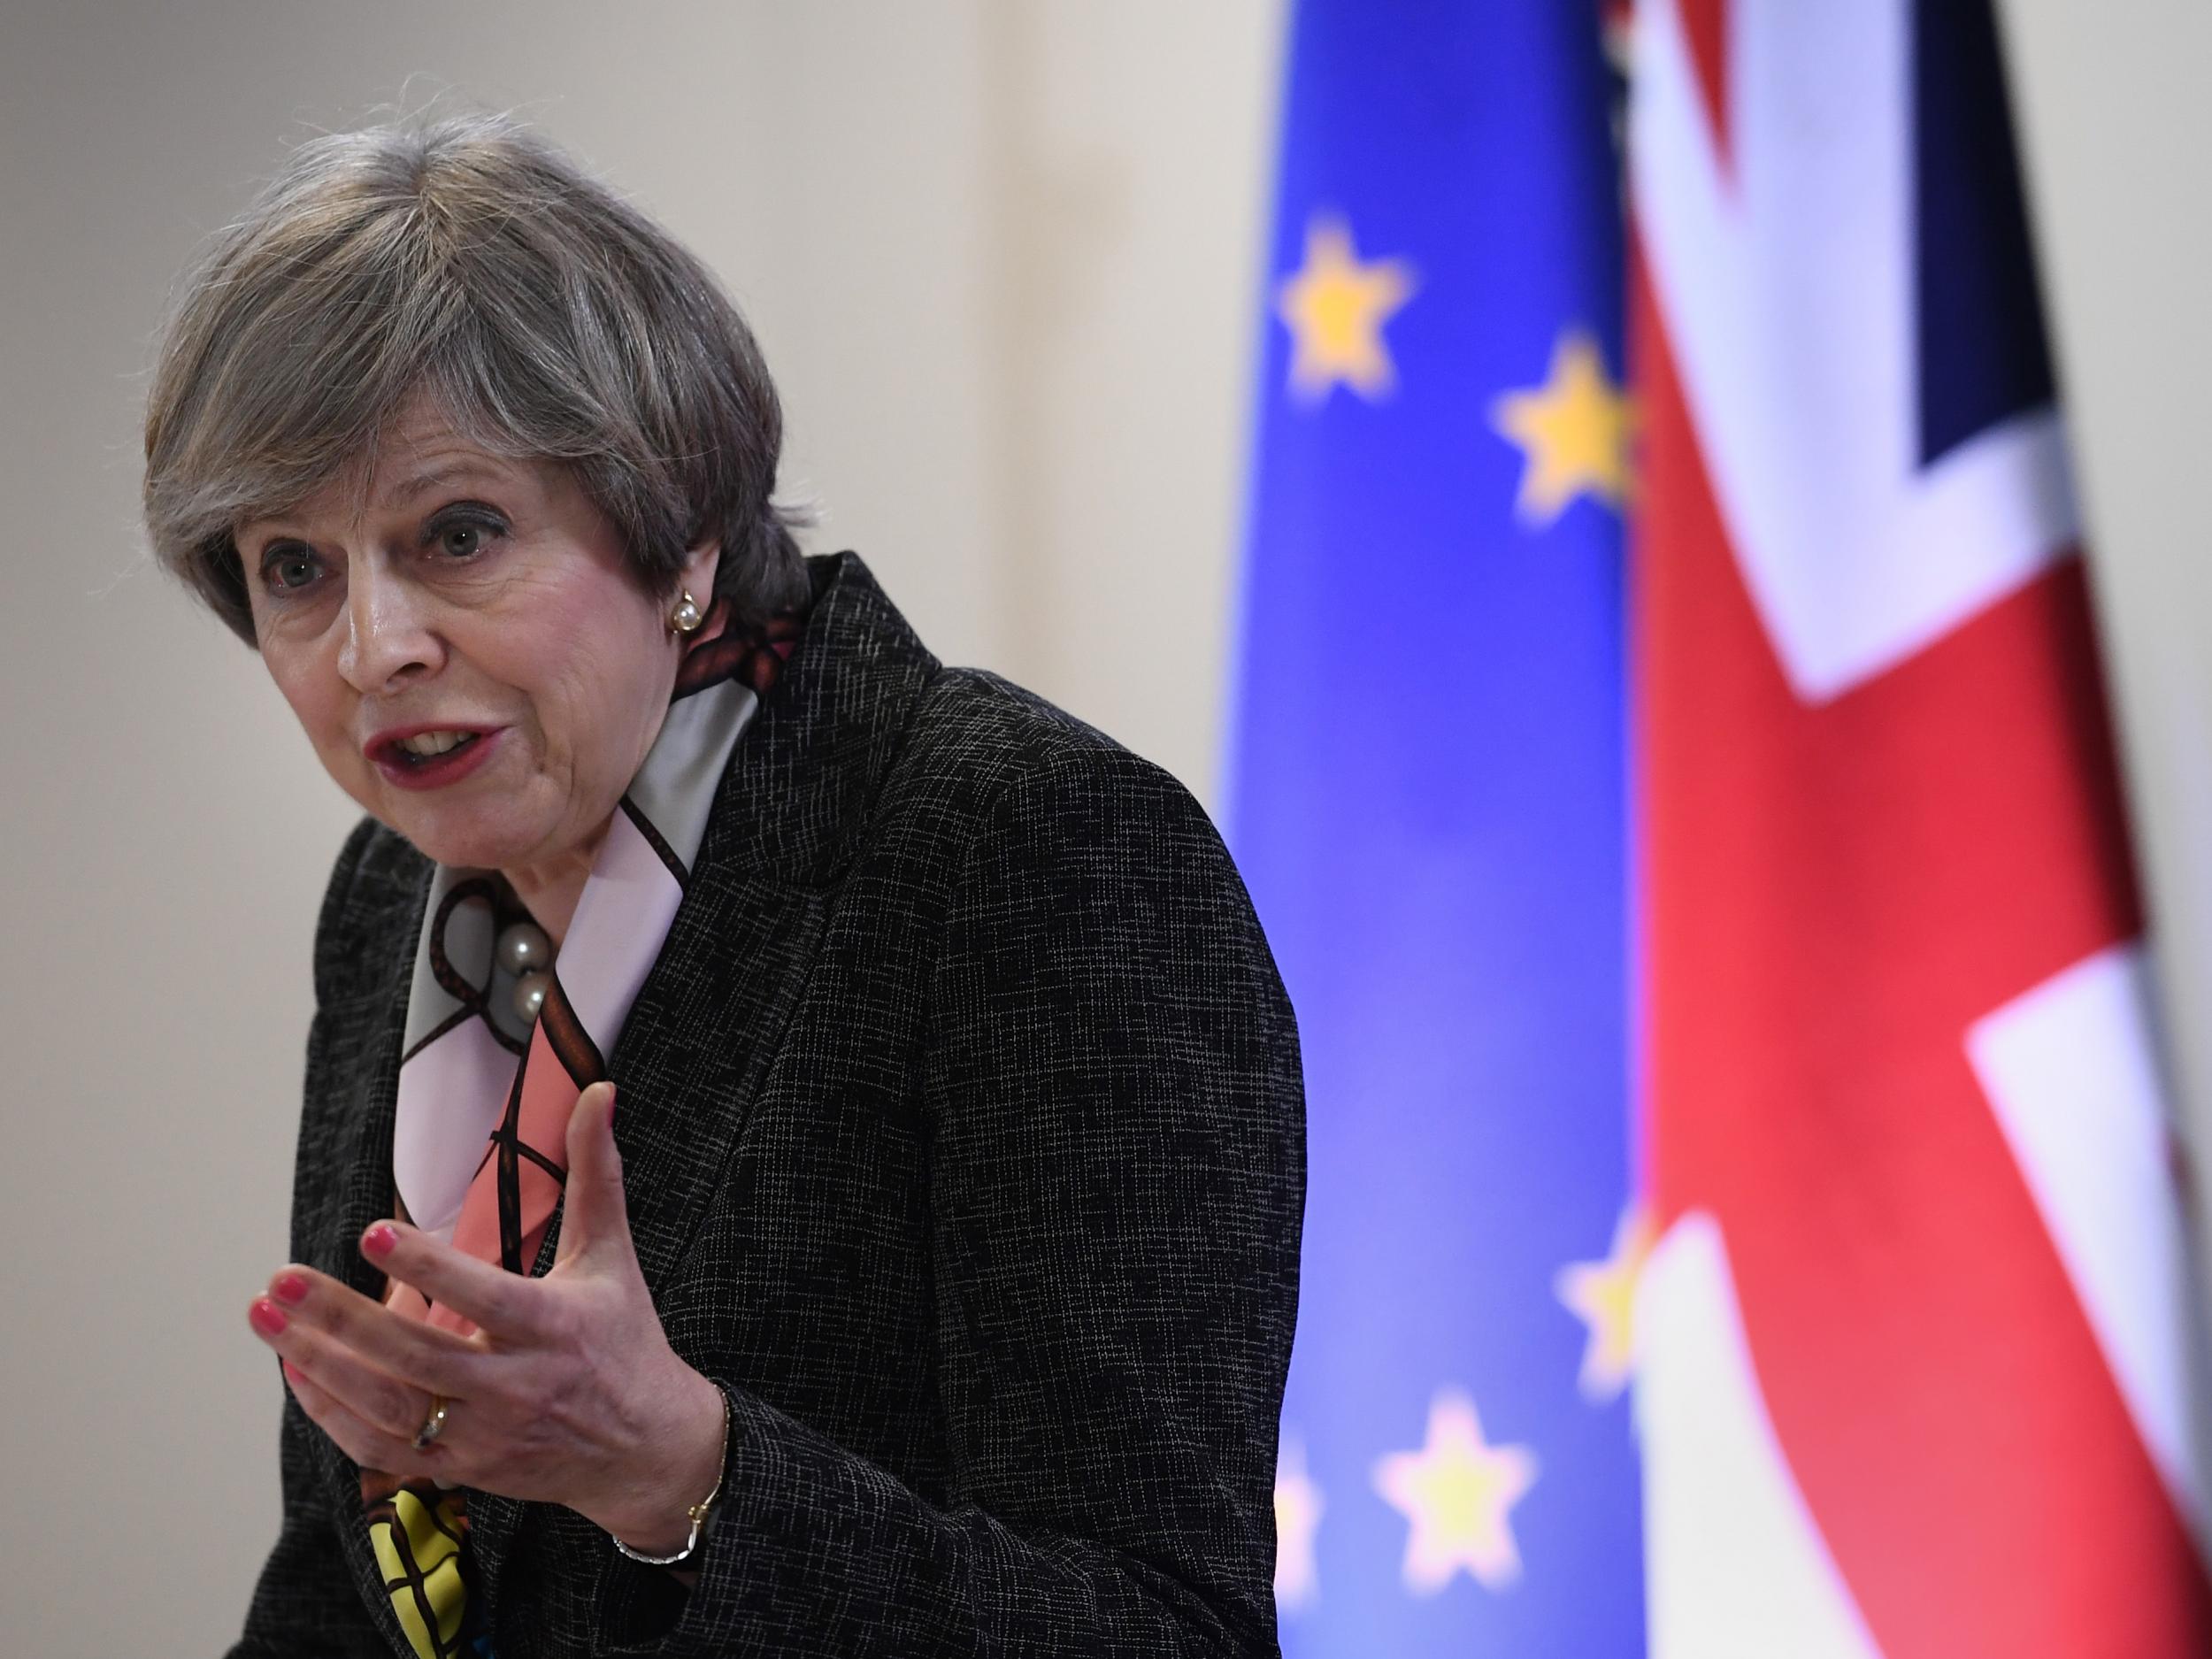 The report casts doubt on the wisdom of Theresa May’s ‘no deal would be better than a bad deal’ mantra, saying that the alternative – reverting to WTO tariffs – could be worst of all outcomes